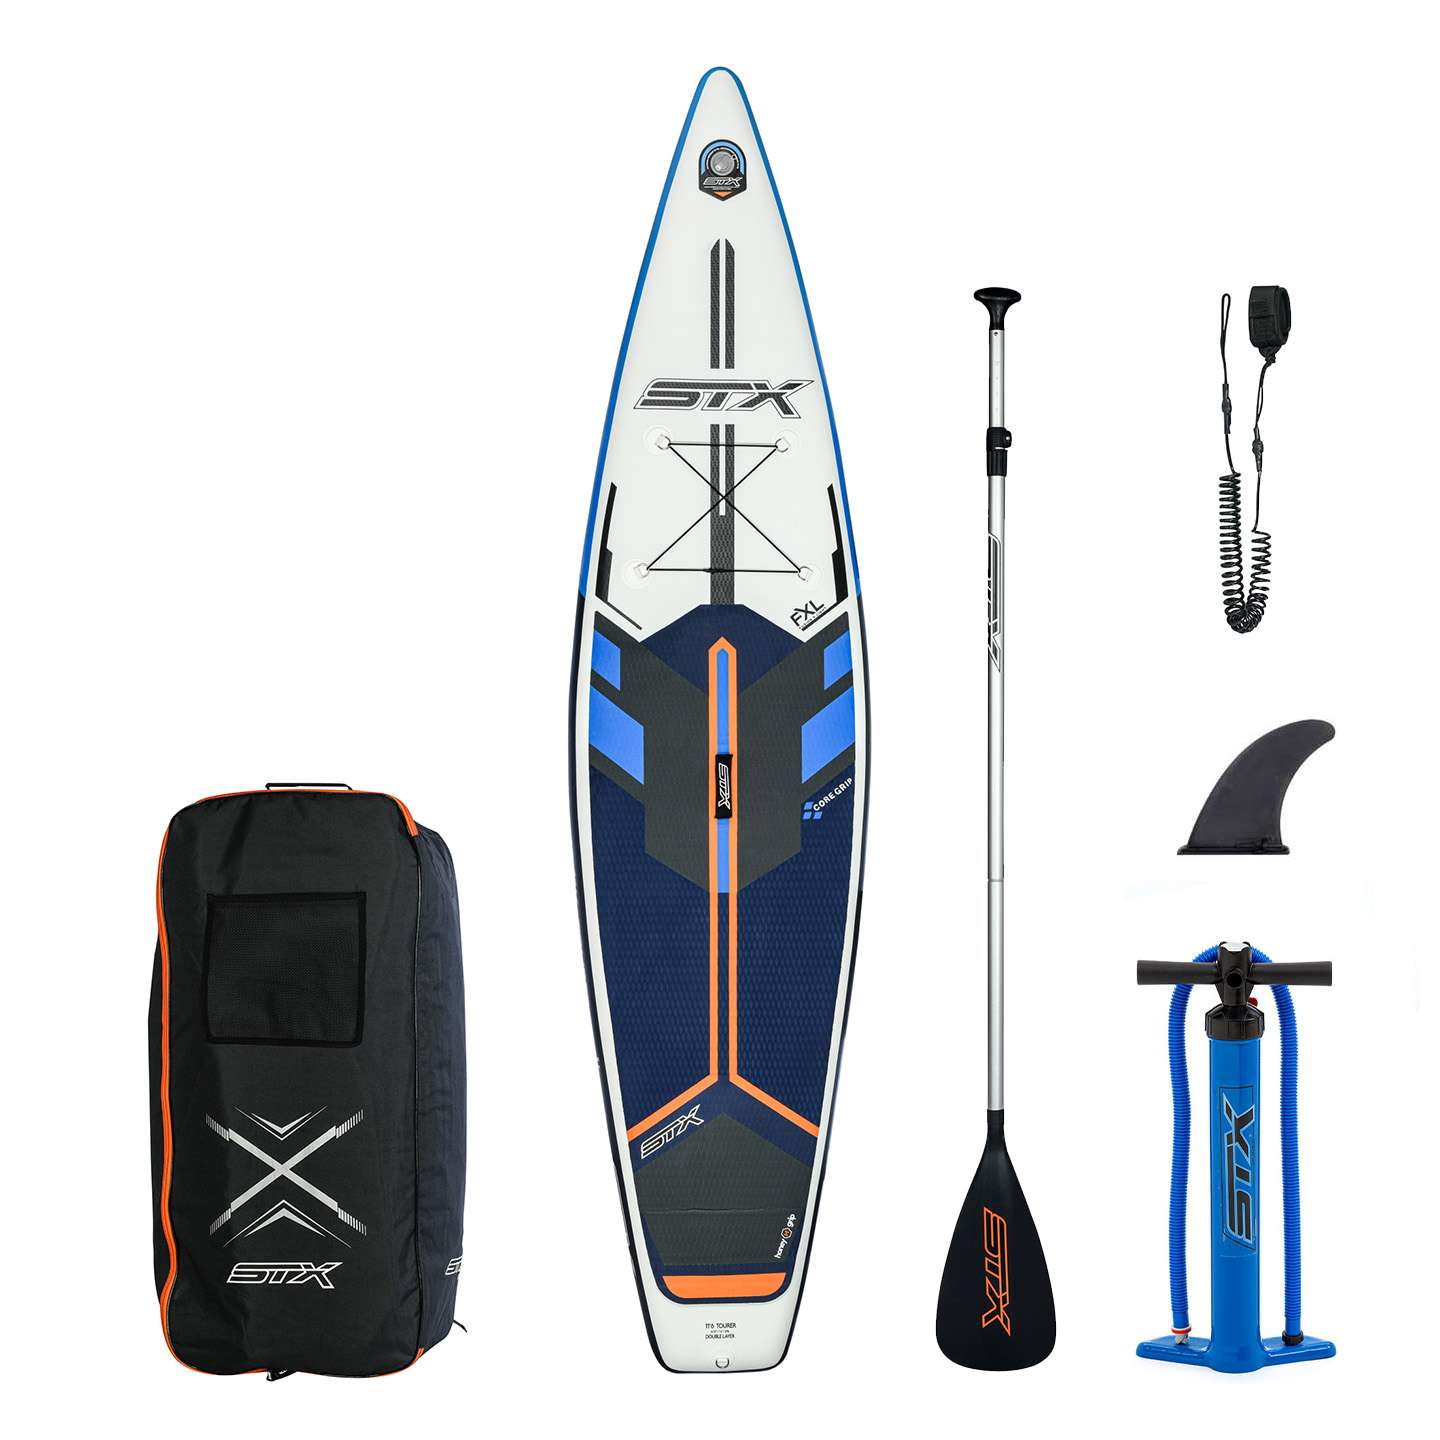 STX Tourer 11'6 Inflatable SUP 2021 | King of Watersports